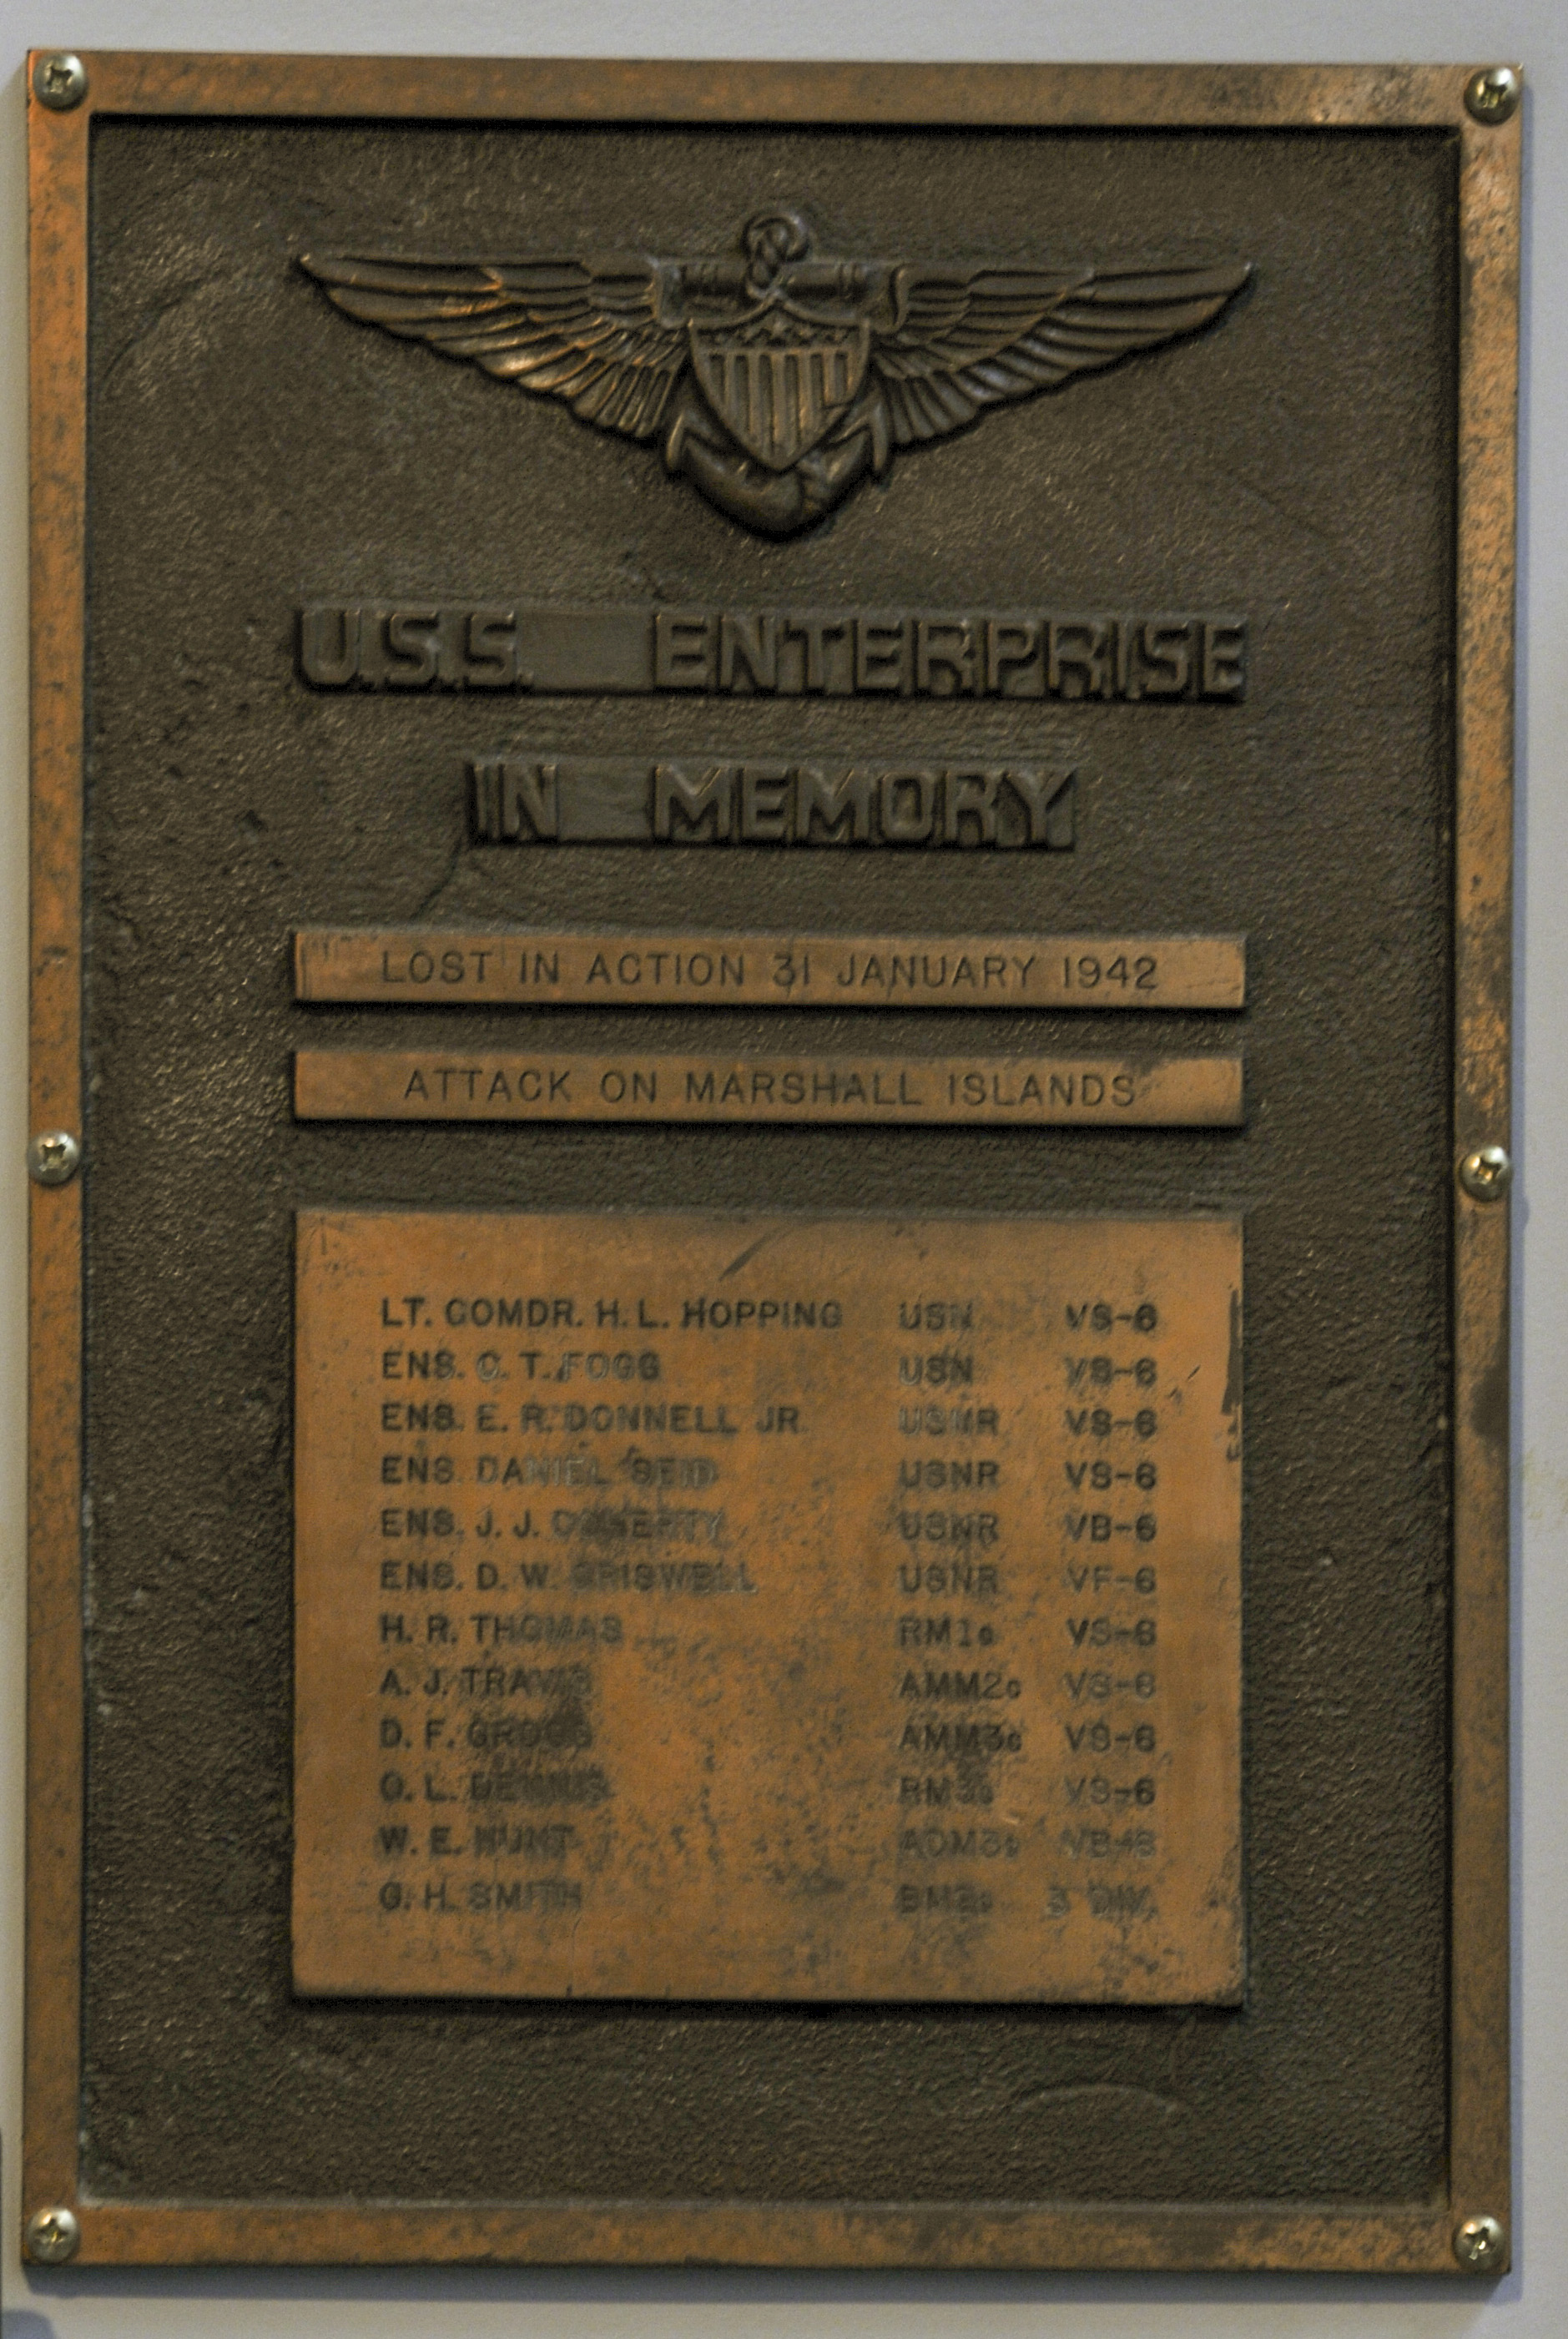 https://www.history.navy.mil/content/dam/nhhc/our-collections/artifacts/ship-and-shore/builders-memorial-and-historical-data-plaques/Commemorative%20Plaques/1958-16-c_Memorial_Plaque_Enterprise/NHHC%201958-16-C%20Memorial%20Plaque%20Enterprise%201942.jpg